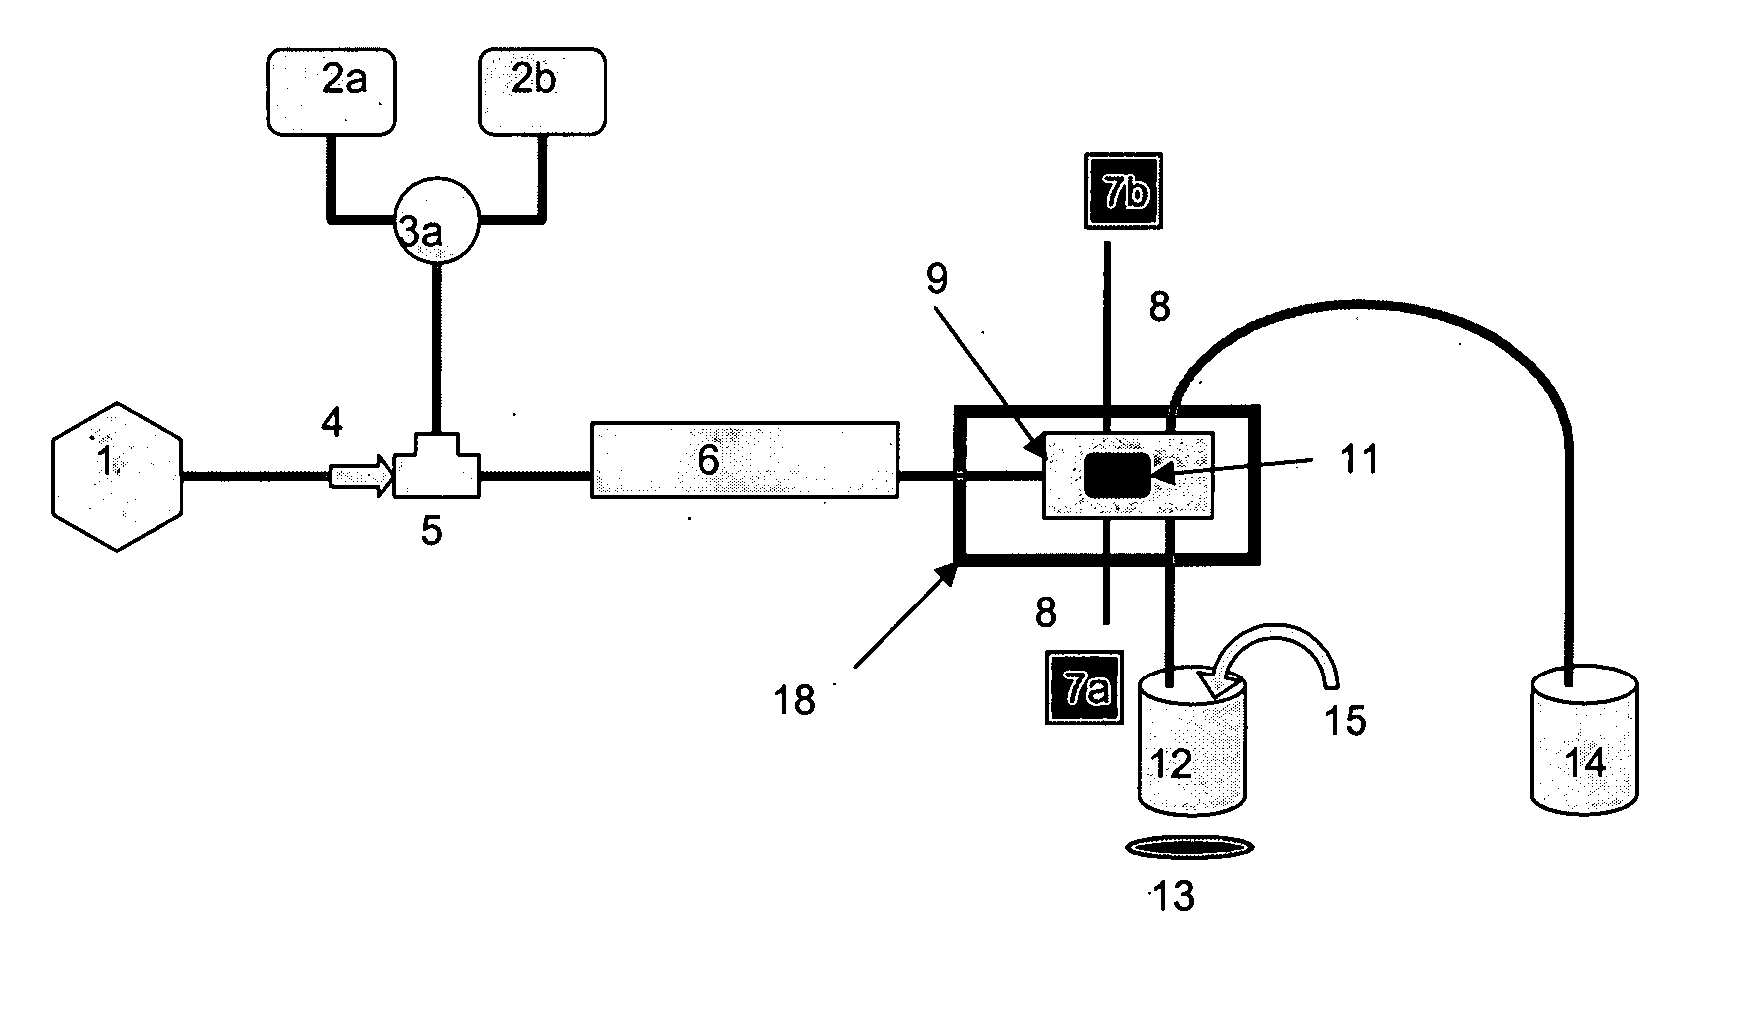 System for purification and analysis of radiochemical products yielded by microfluidic synthesis devices